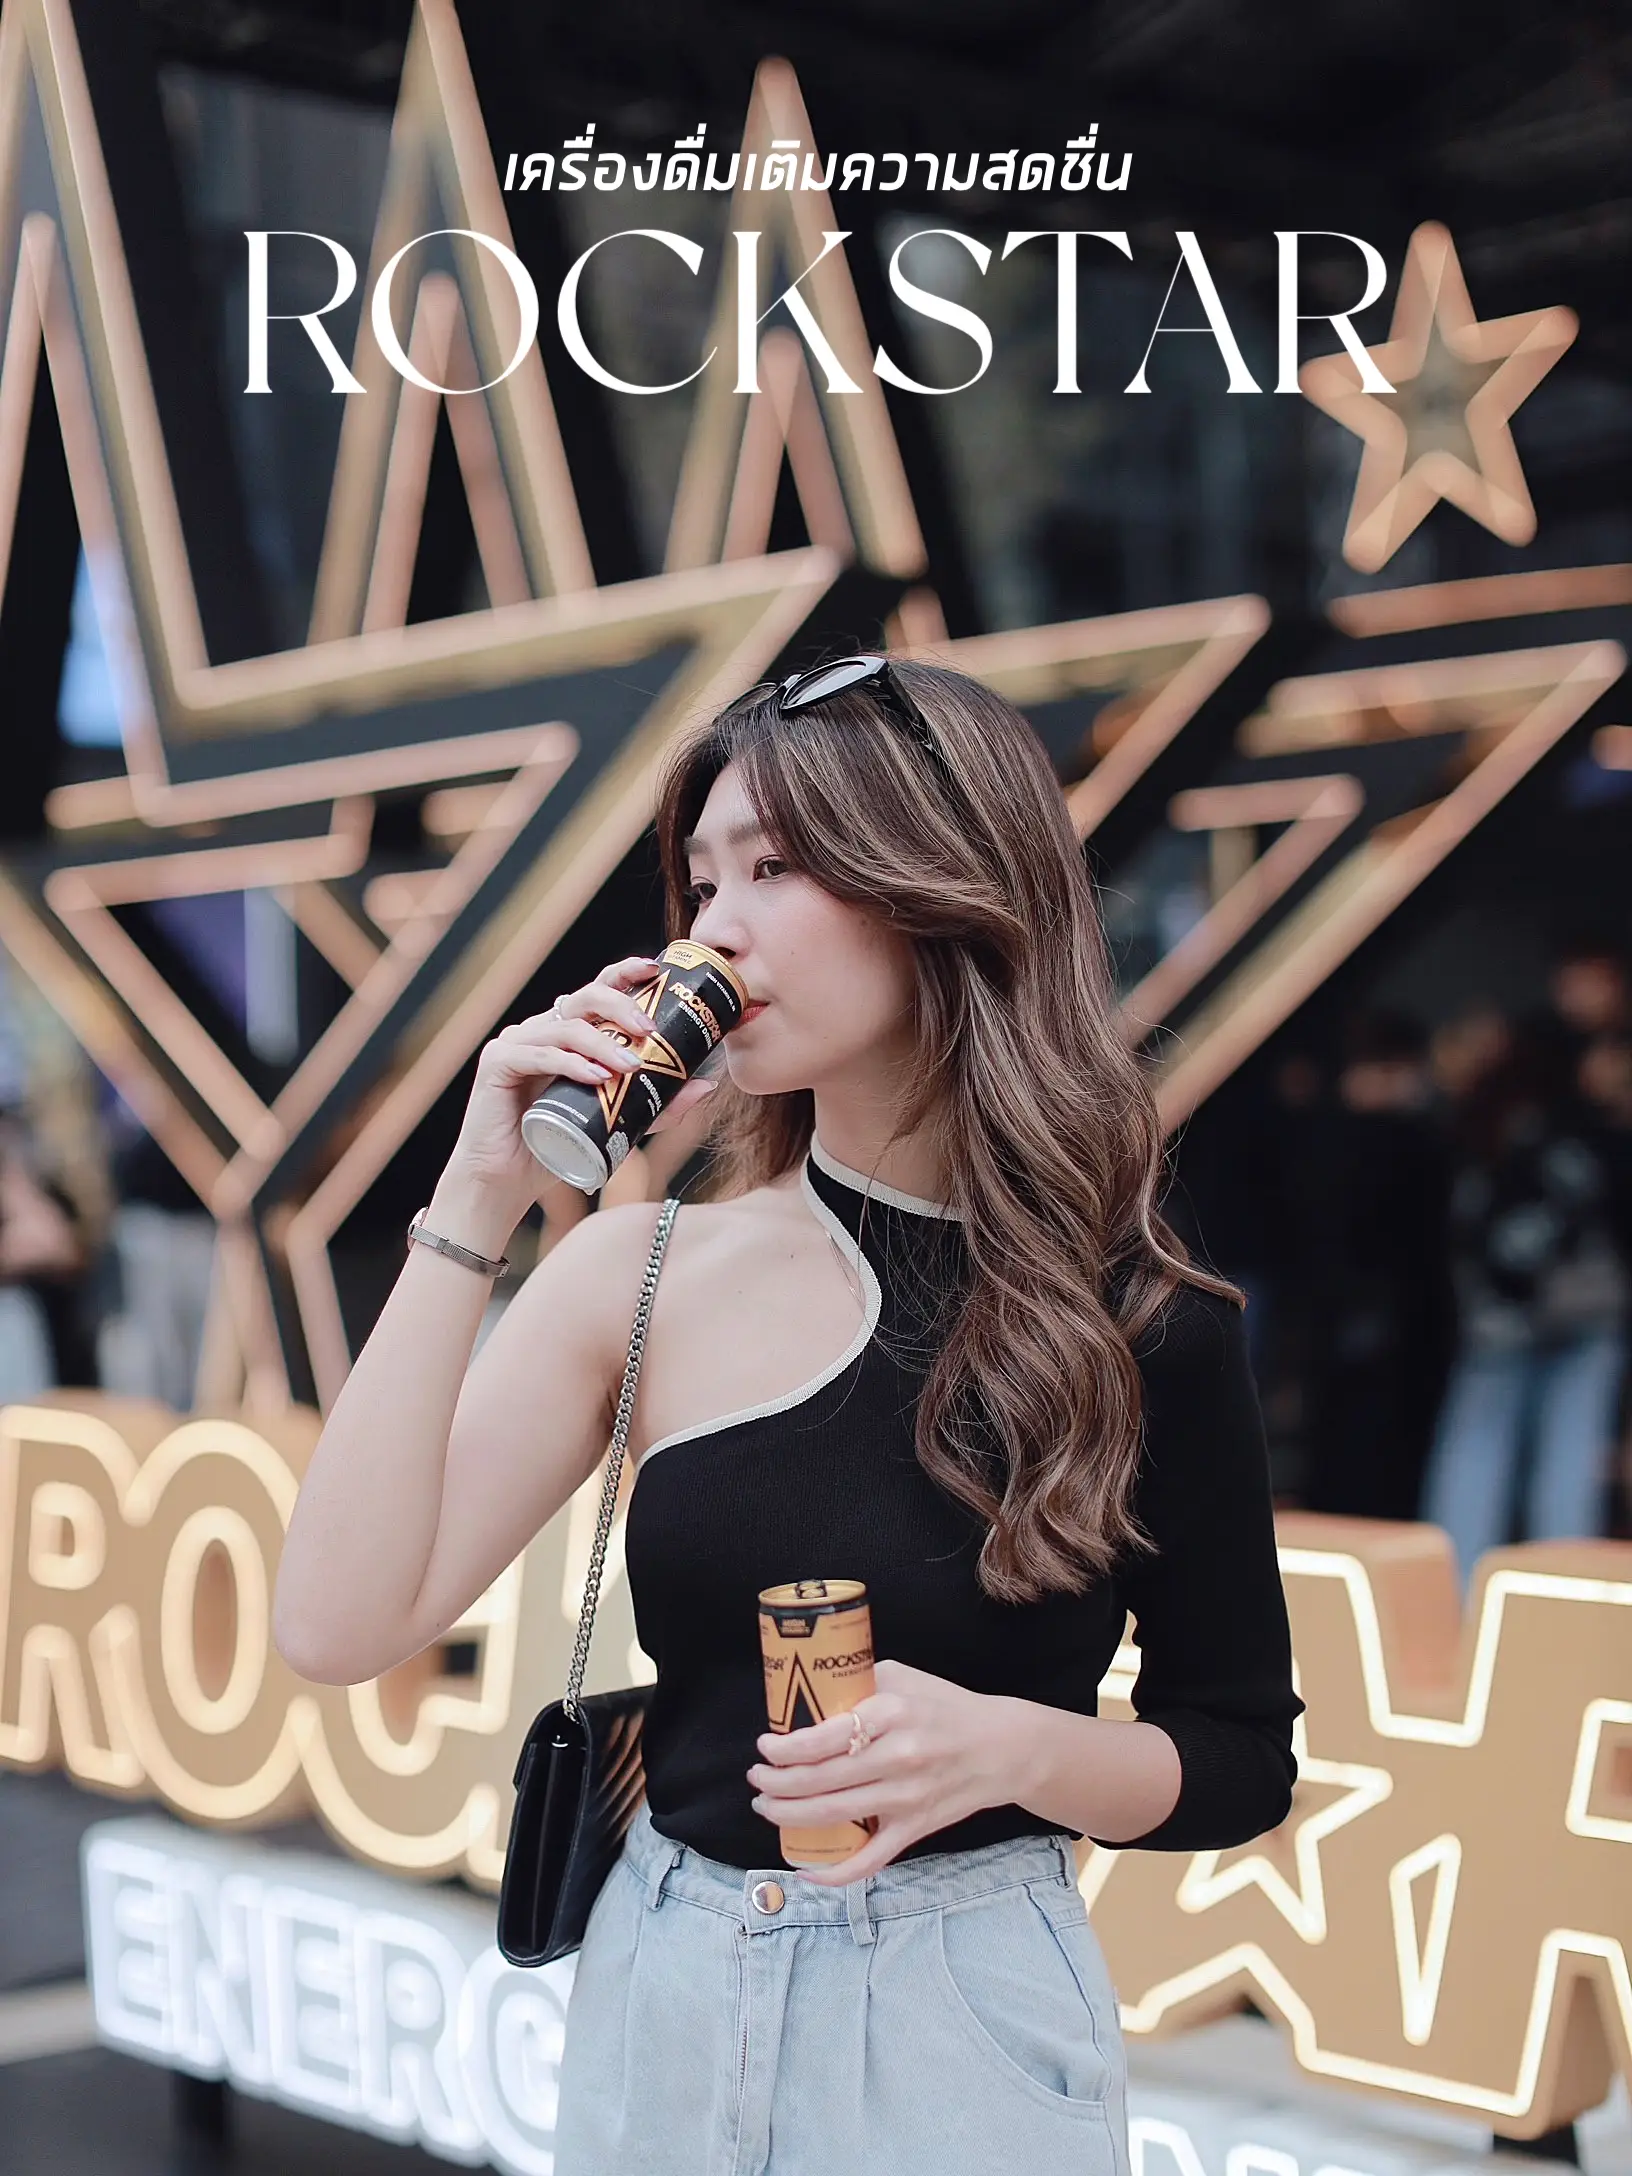 Take it to the ROCKSTAR ⭐, Gallery posted by แนทเทล